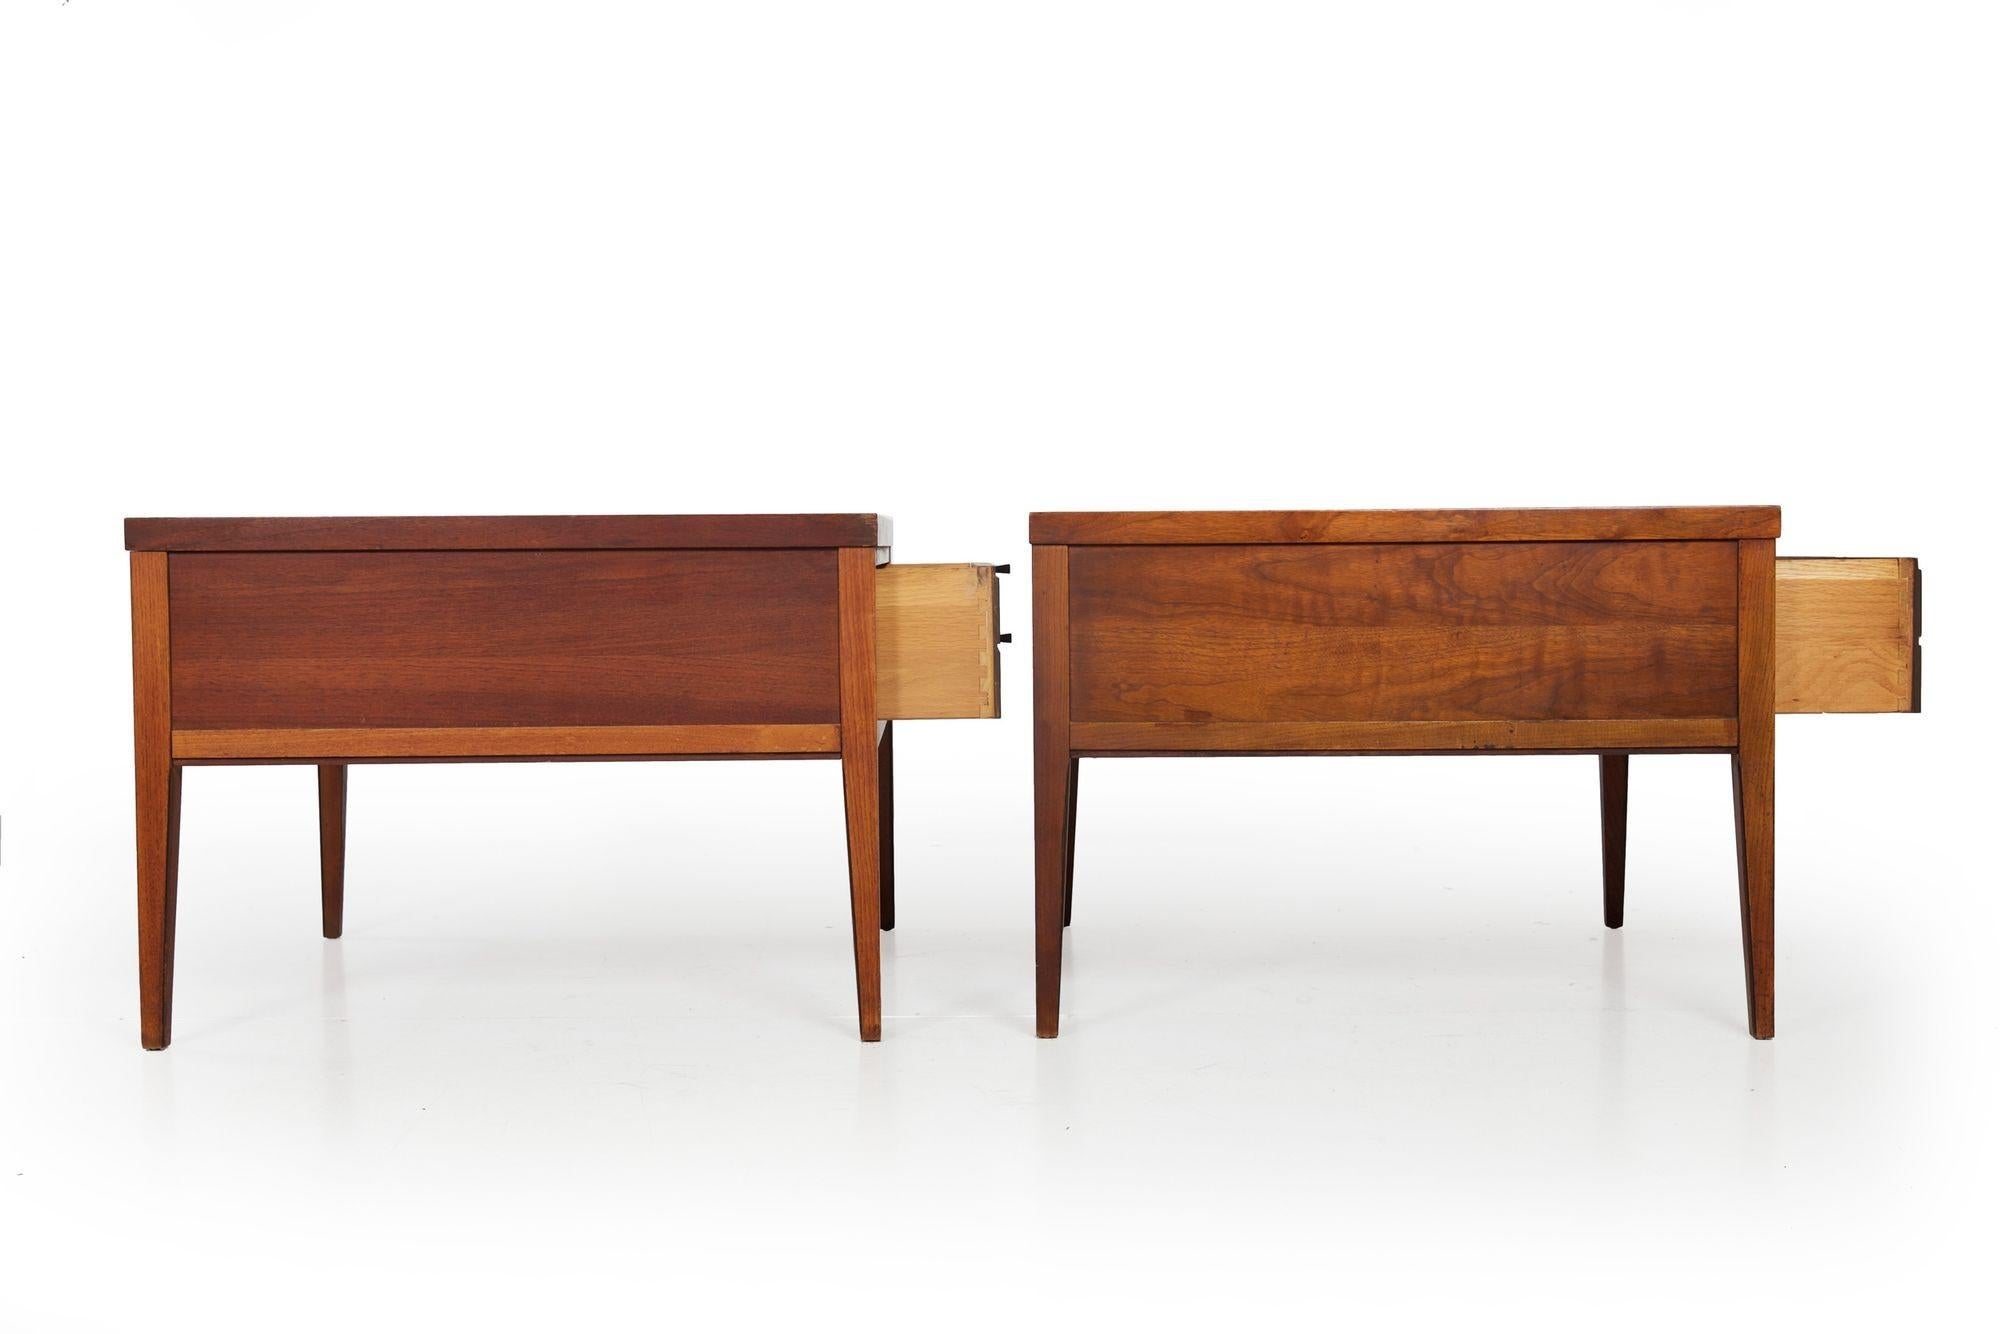 Vintage Mid-Century Modern Pair of Lane “Tuxedo” End Tables Nightstands In Good Condition For Sale In Shippensburg, PA